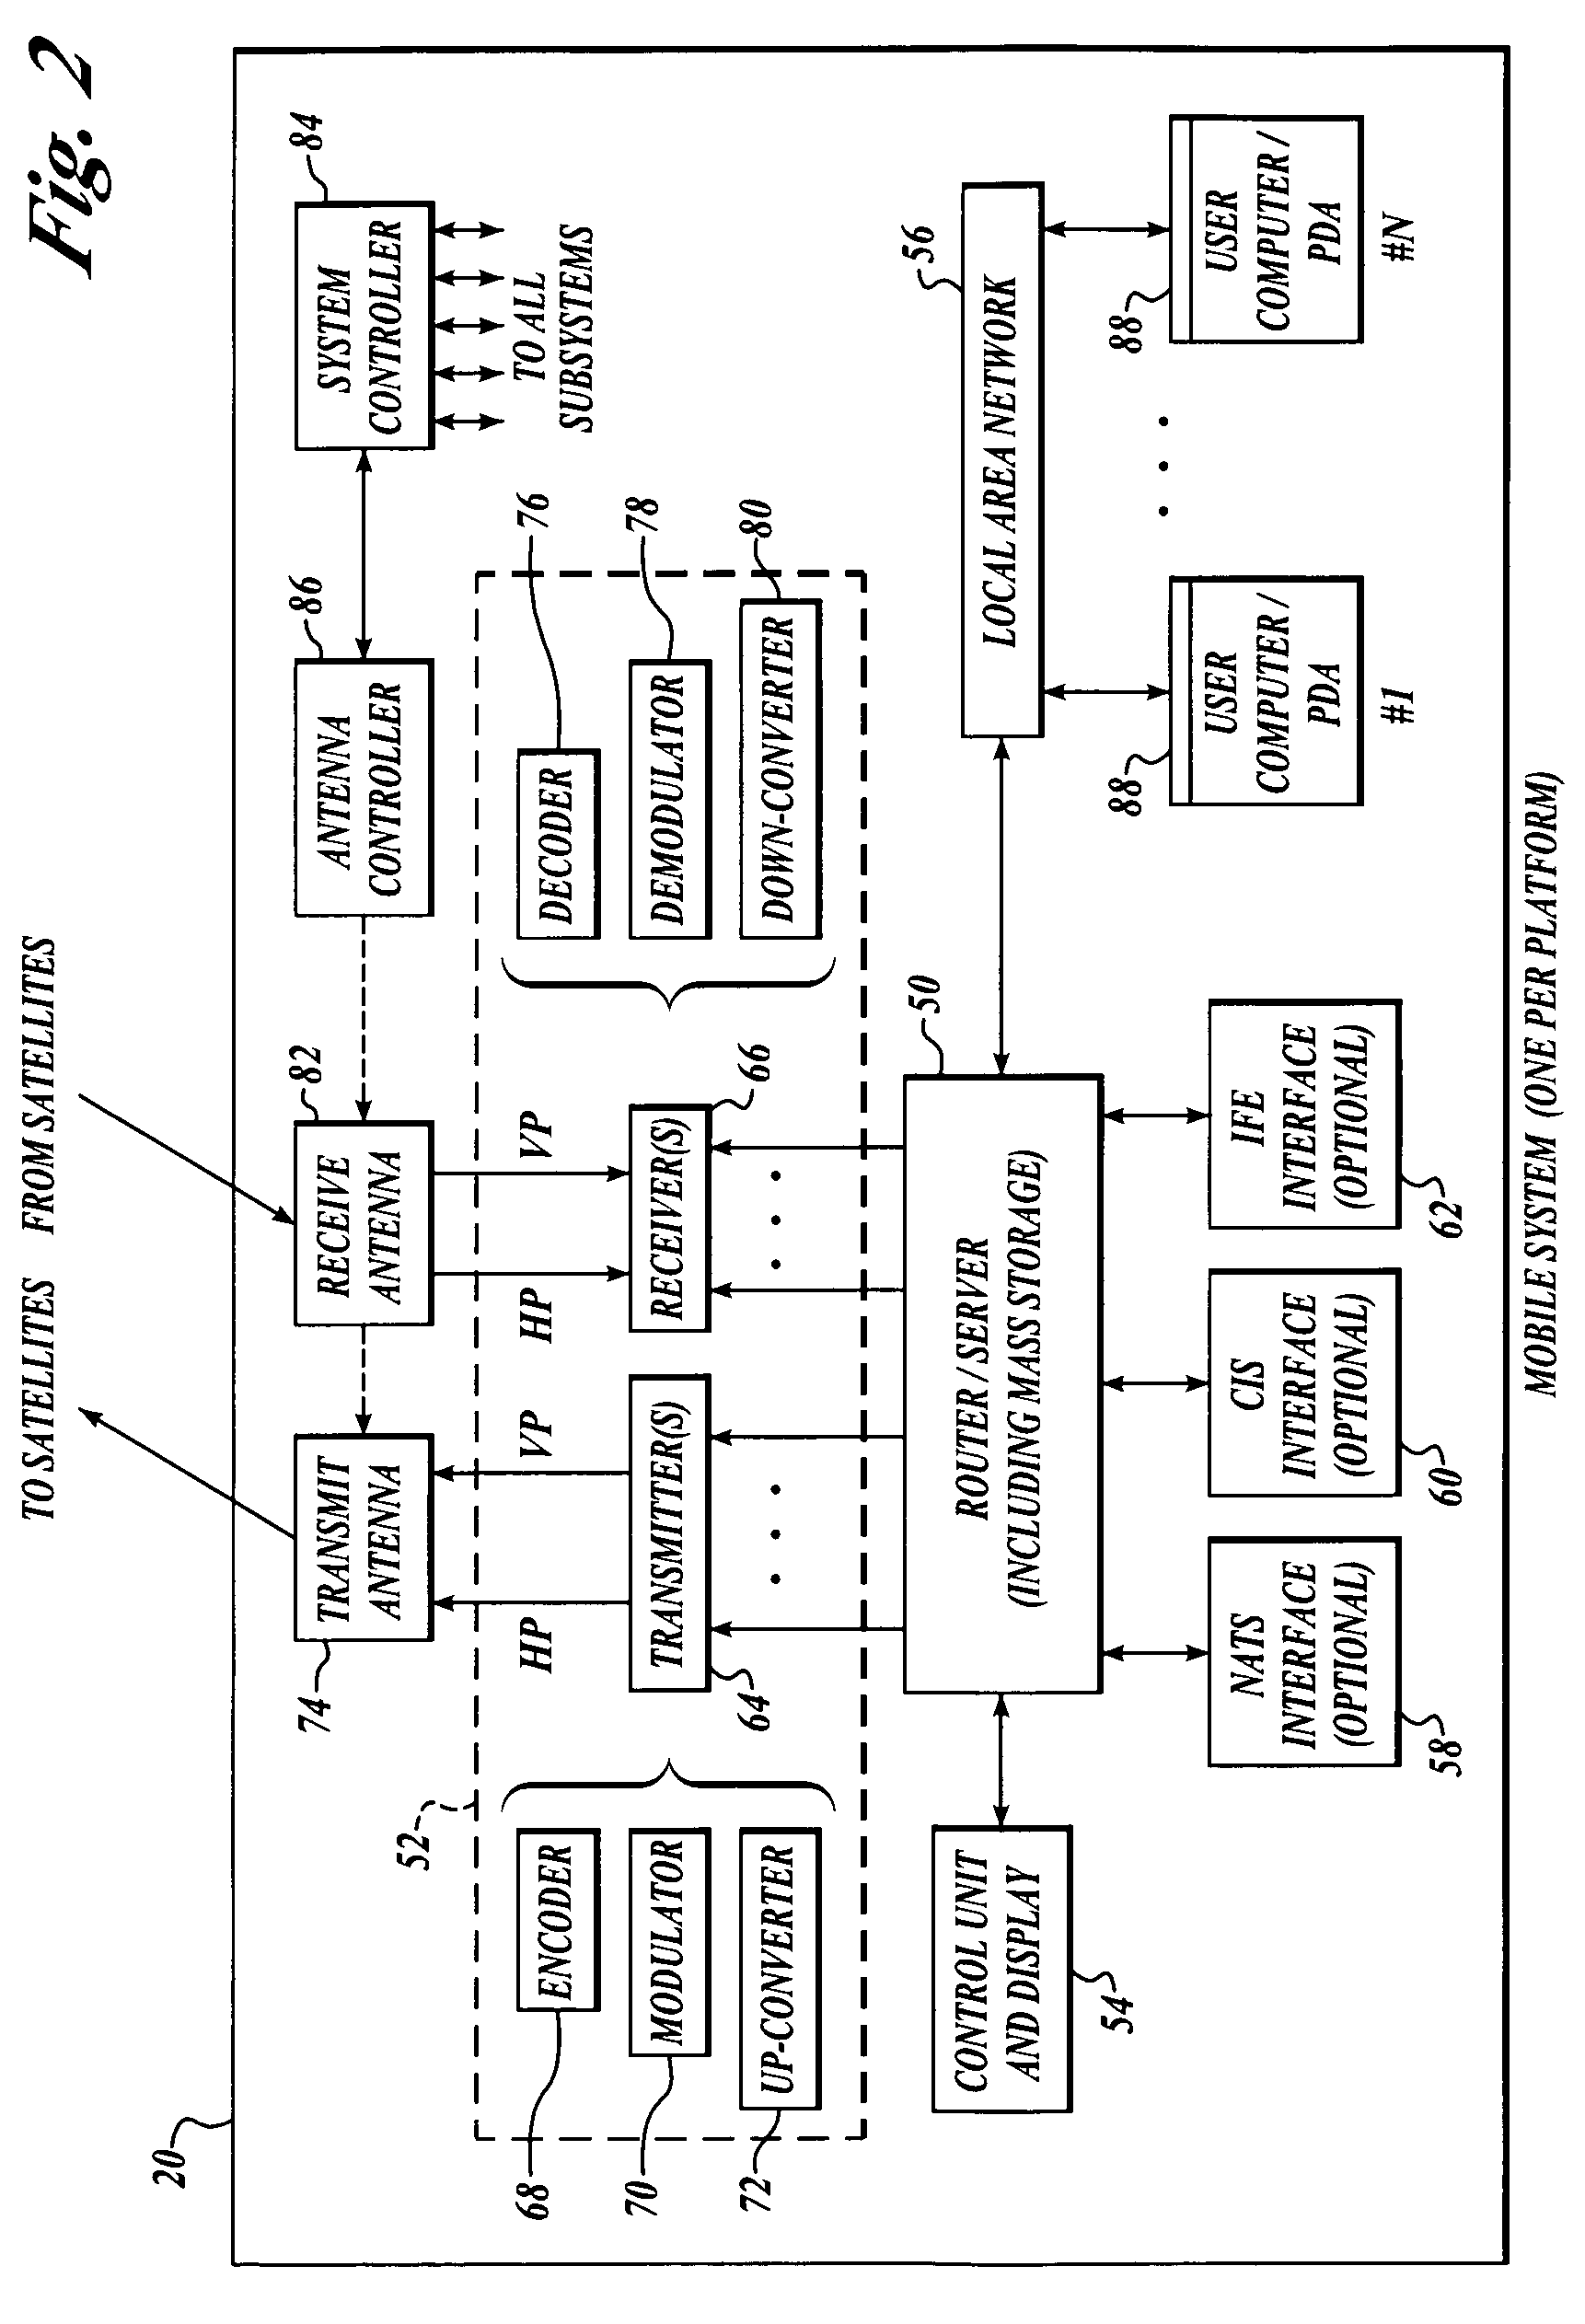 Method and apparatus for bi-directional video teleconferencing on mobile platforms